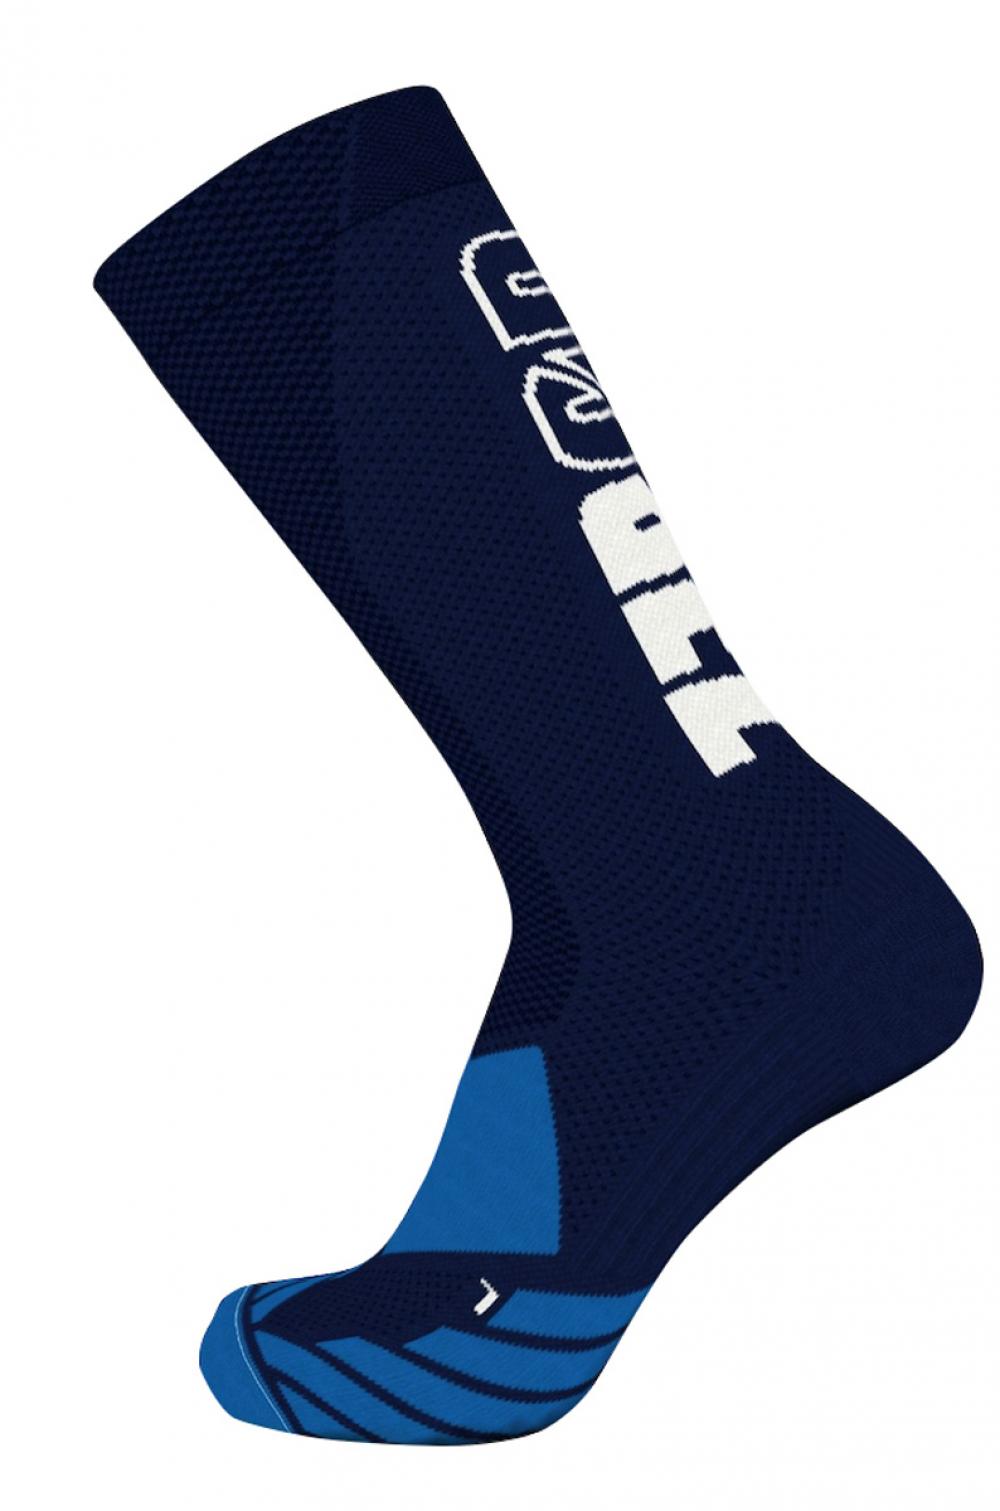 Z3R0D - navy high socks with white logo for running, cycling and ...